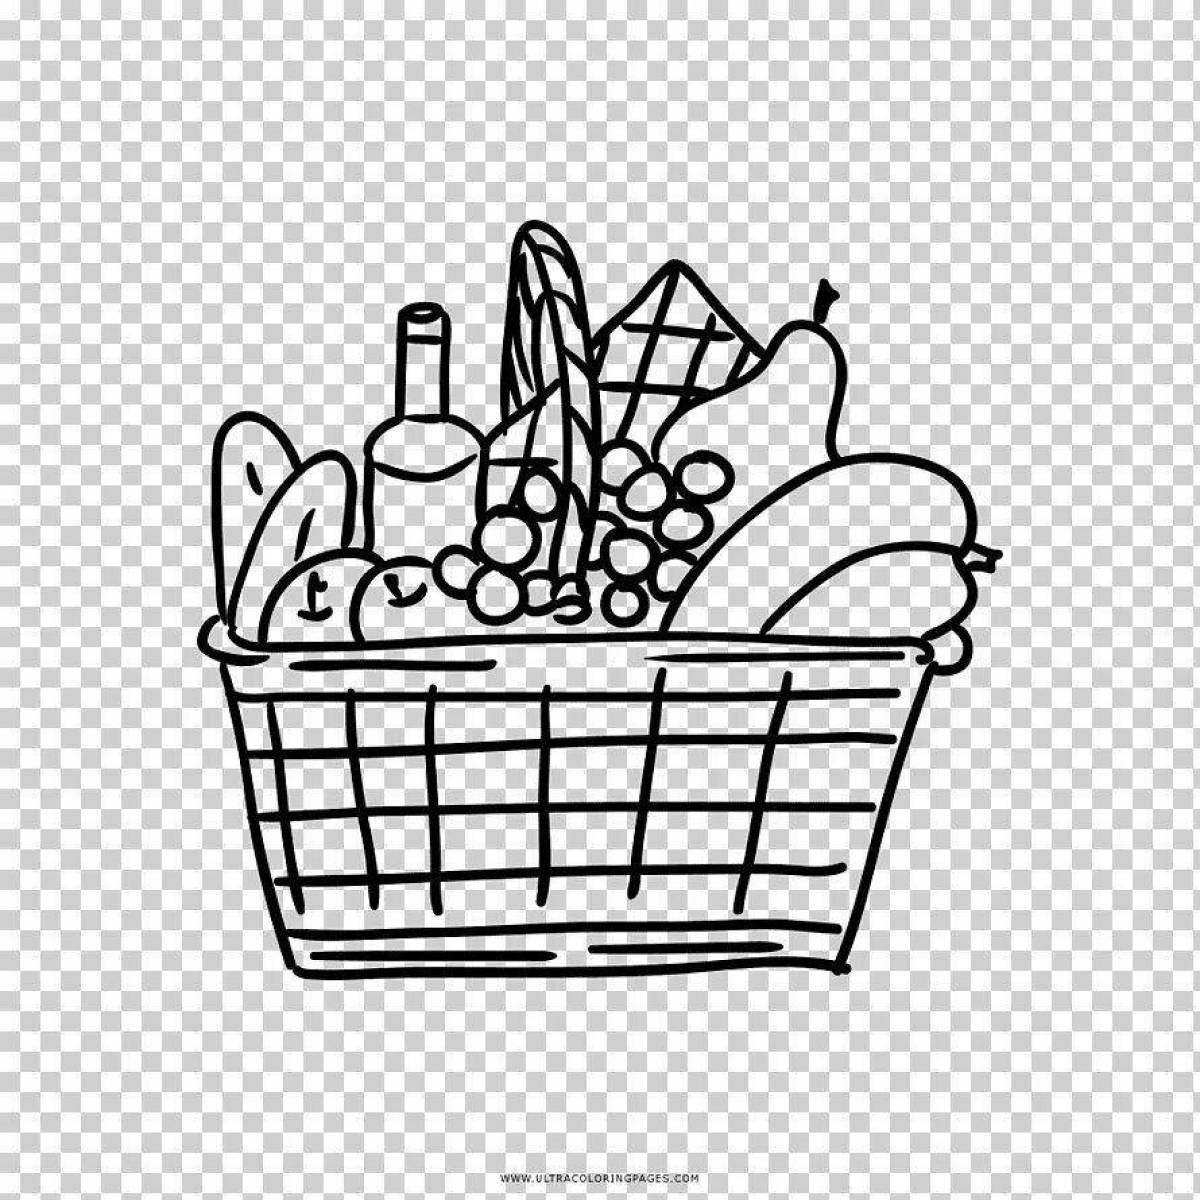 Tempting grocery cart coloring page